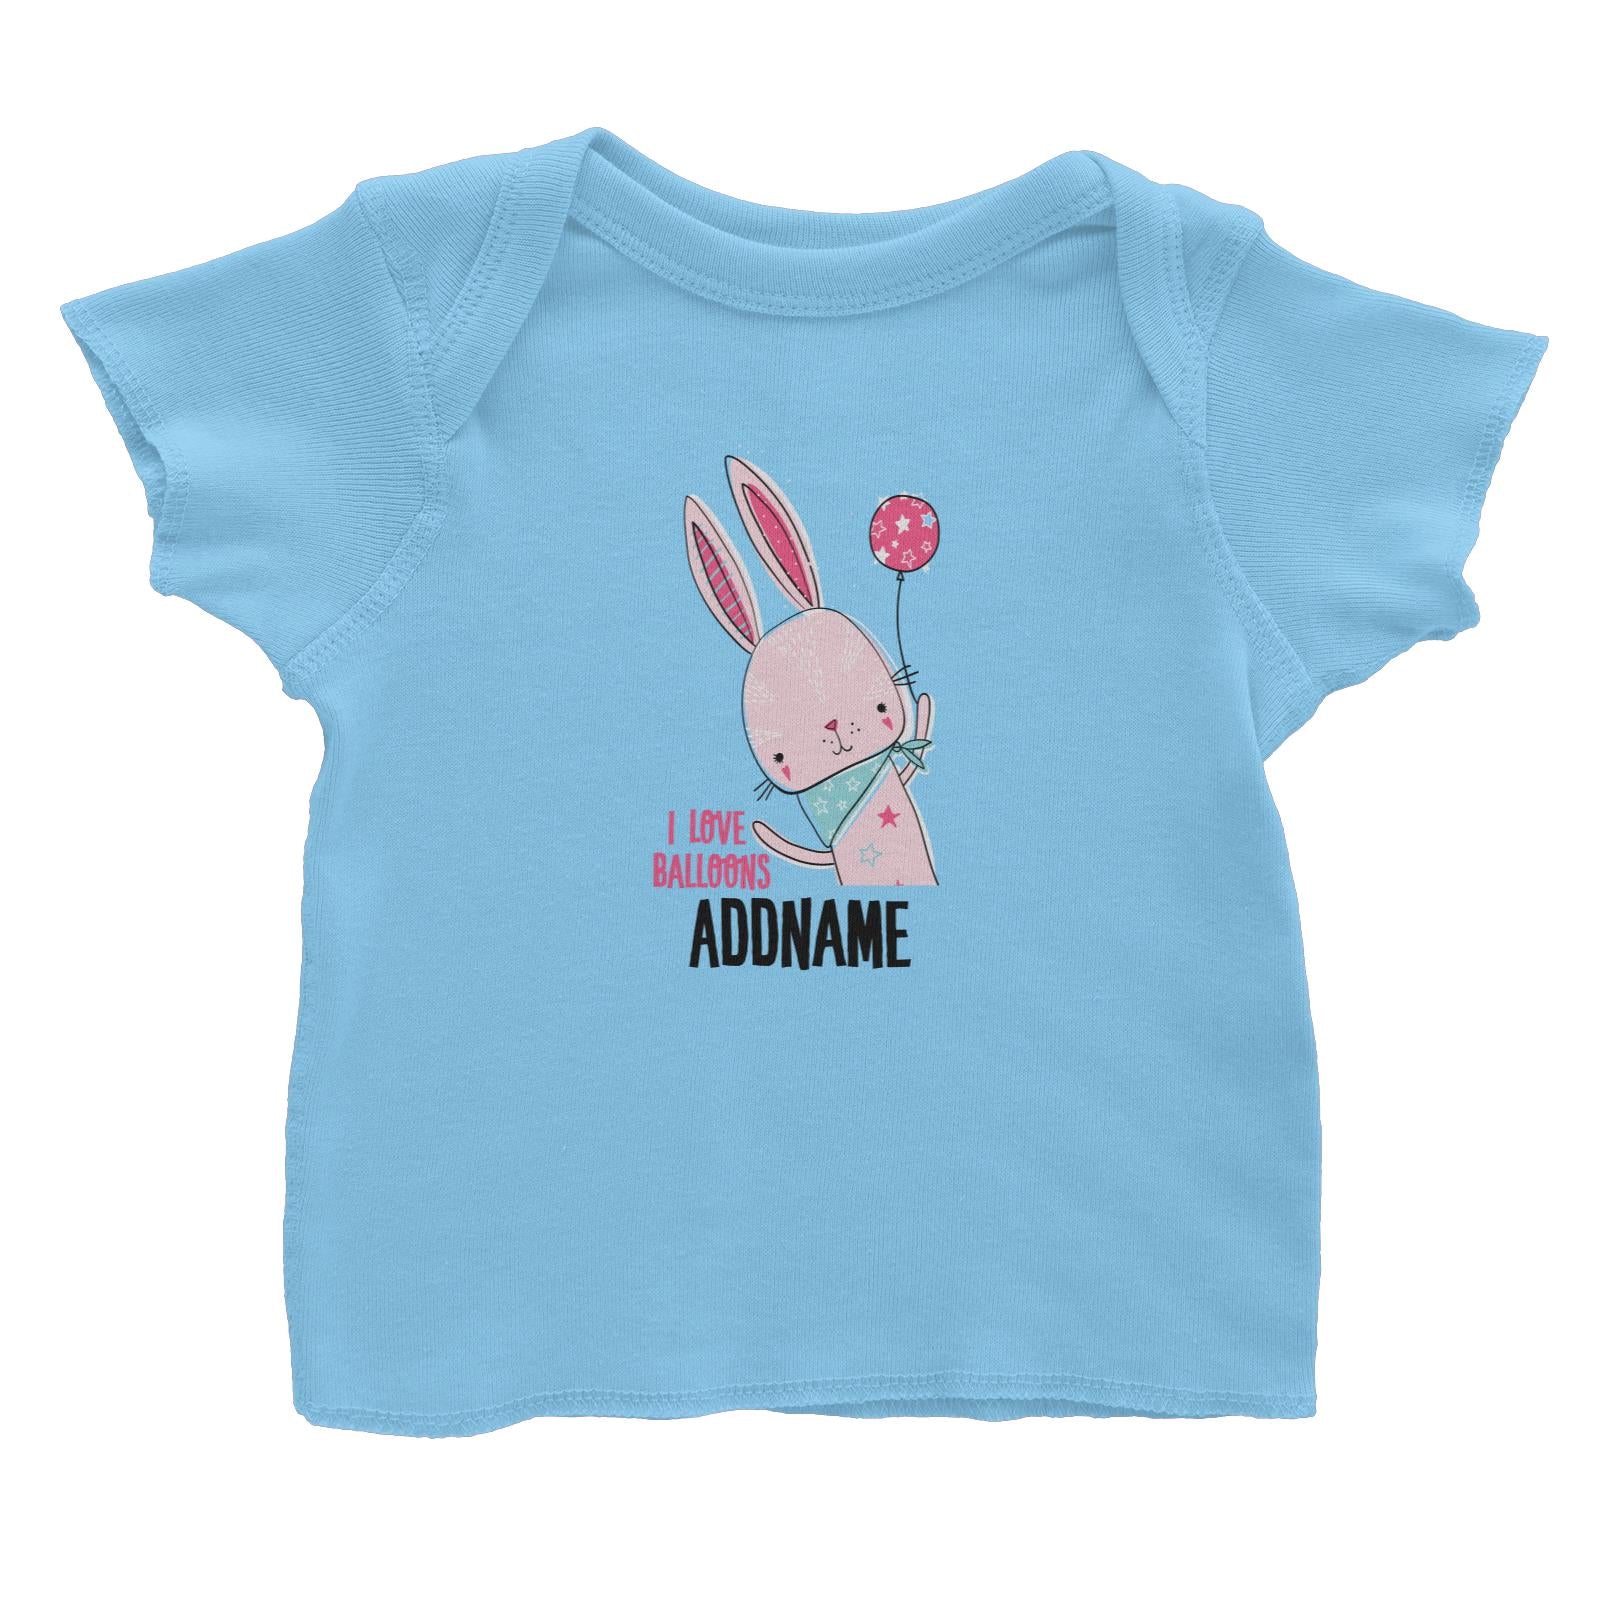 Cool Vibrant Series I Love Balloons Addname Baby T-Shirt